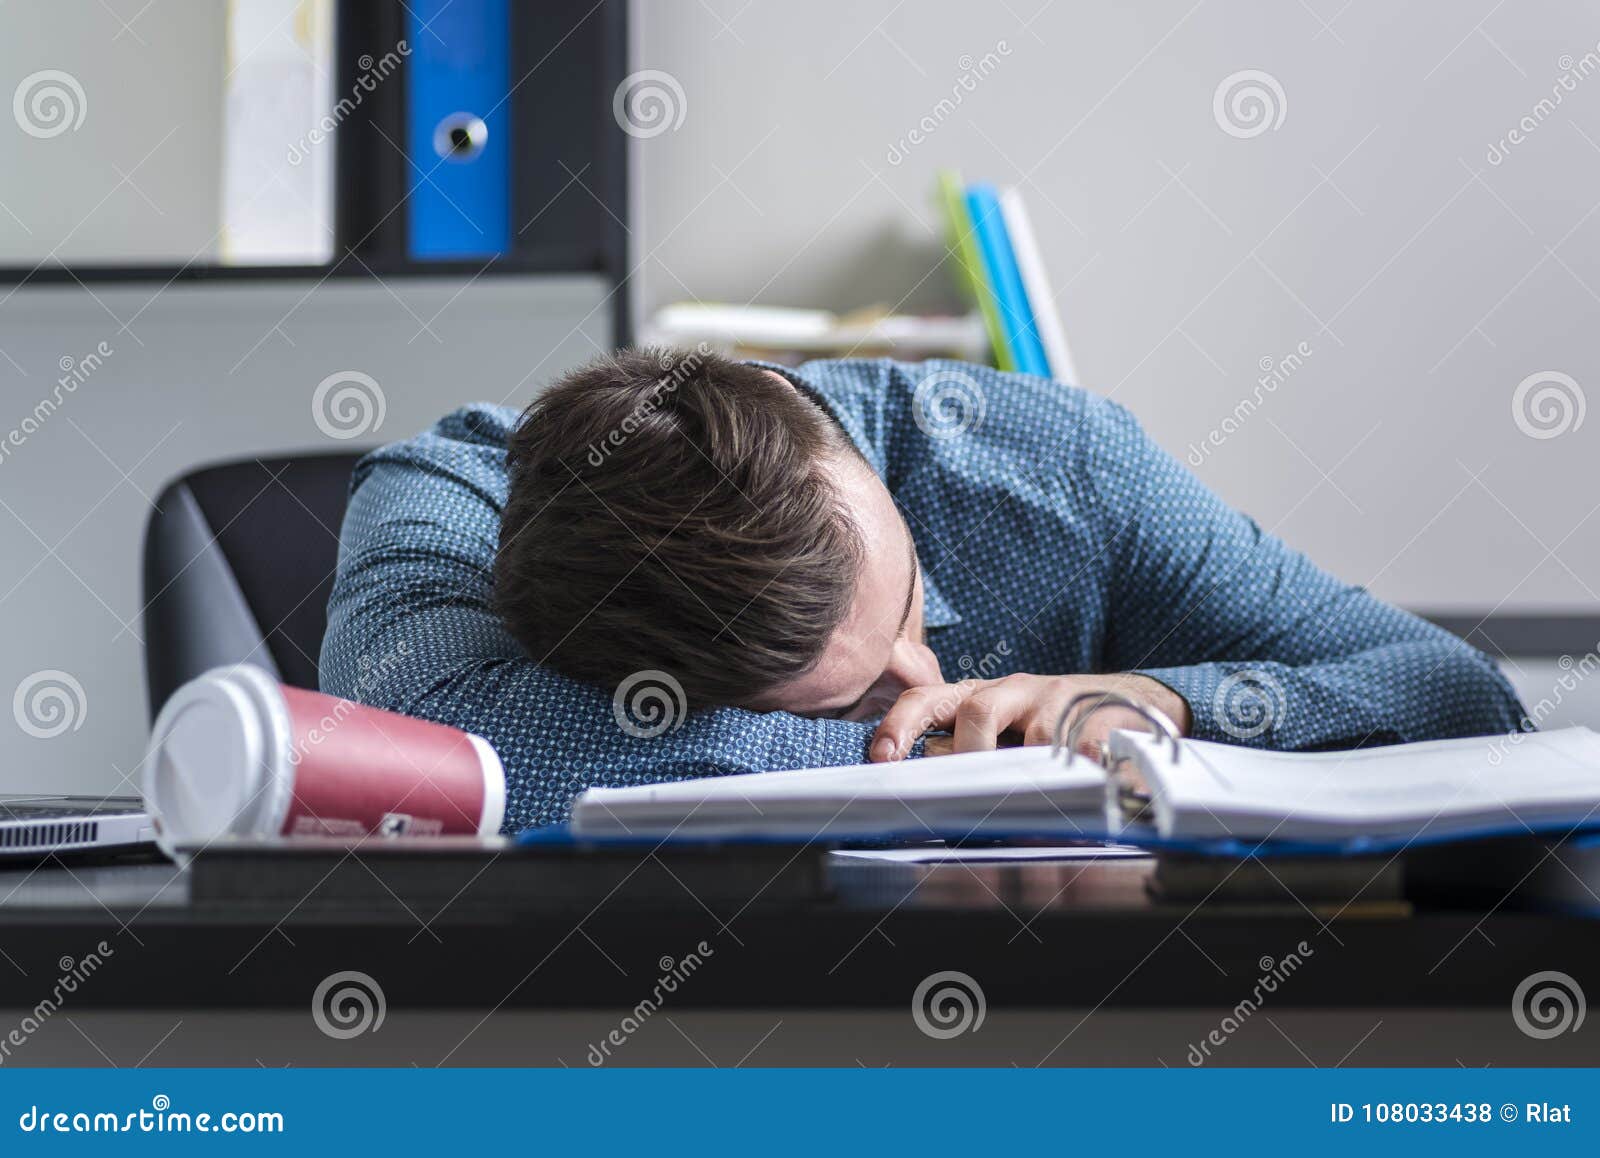 Tired Worker Sleeping At A Desk Stock Photo Image Of Concept